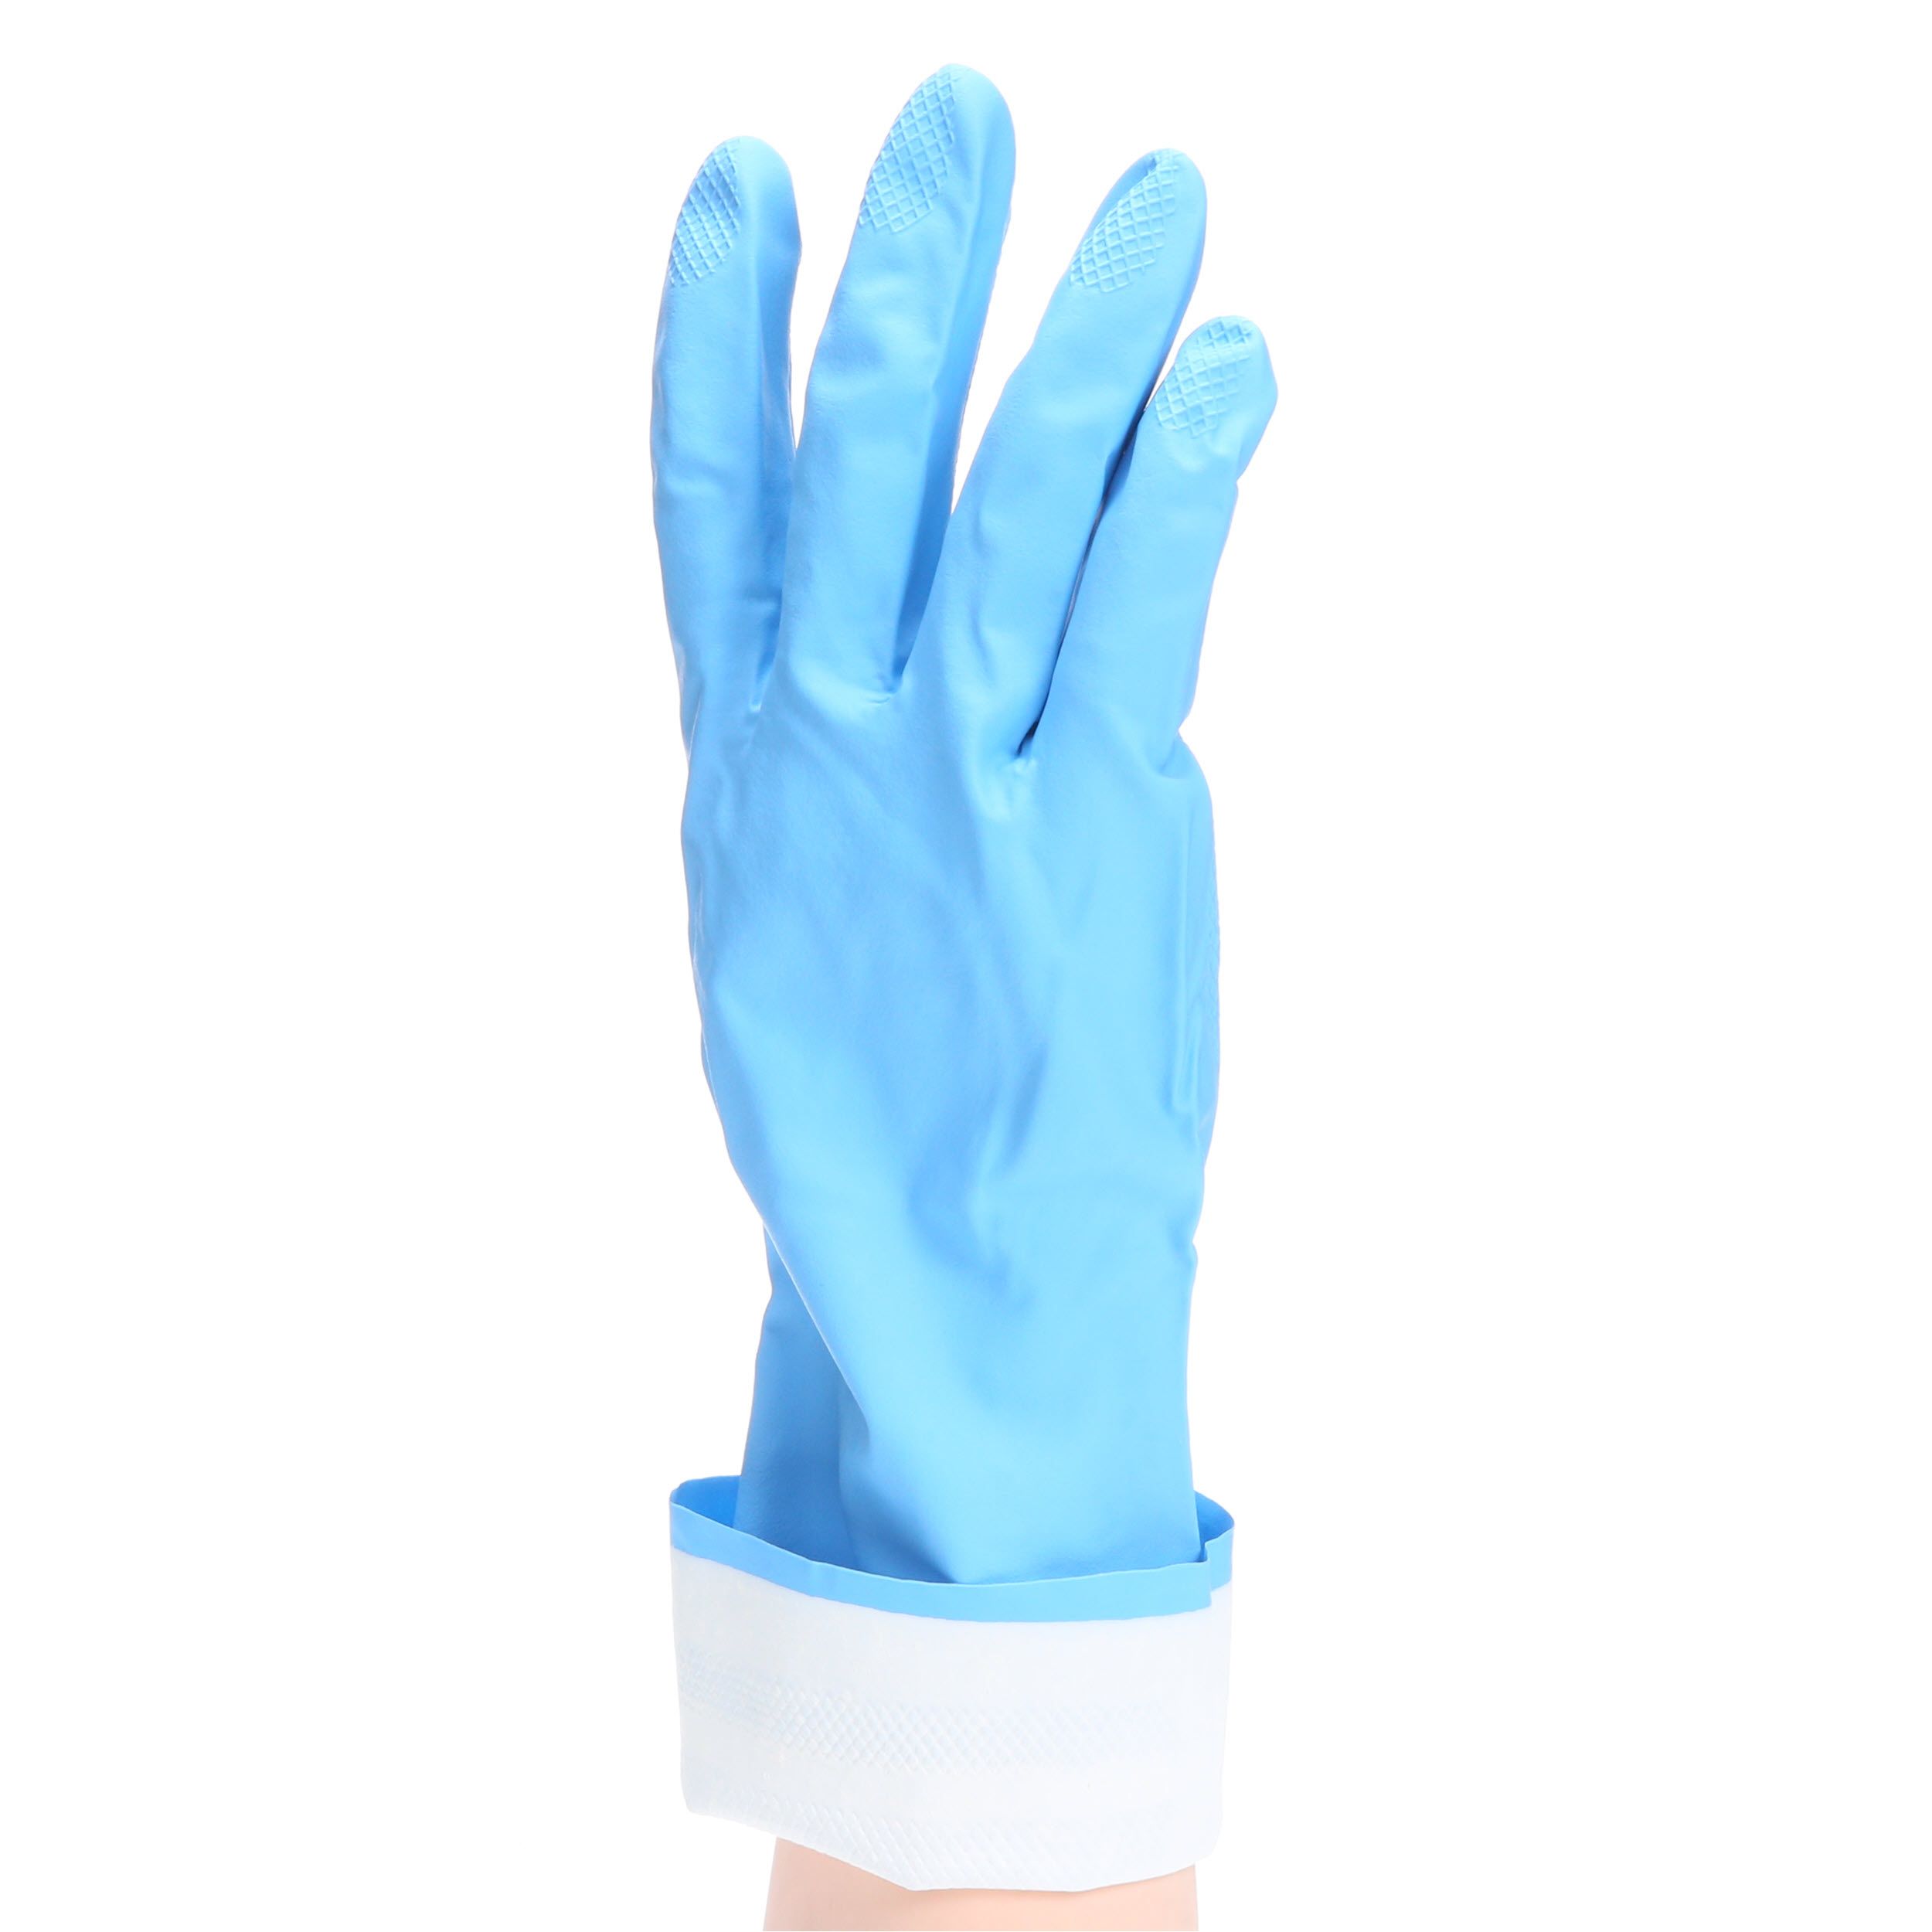 Butler Home Products 623149 Comfort Choice Small Medium Durable Natural Latex Clorox S/M Comfort Foam Technology Gloves,